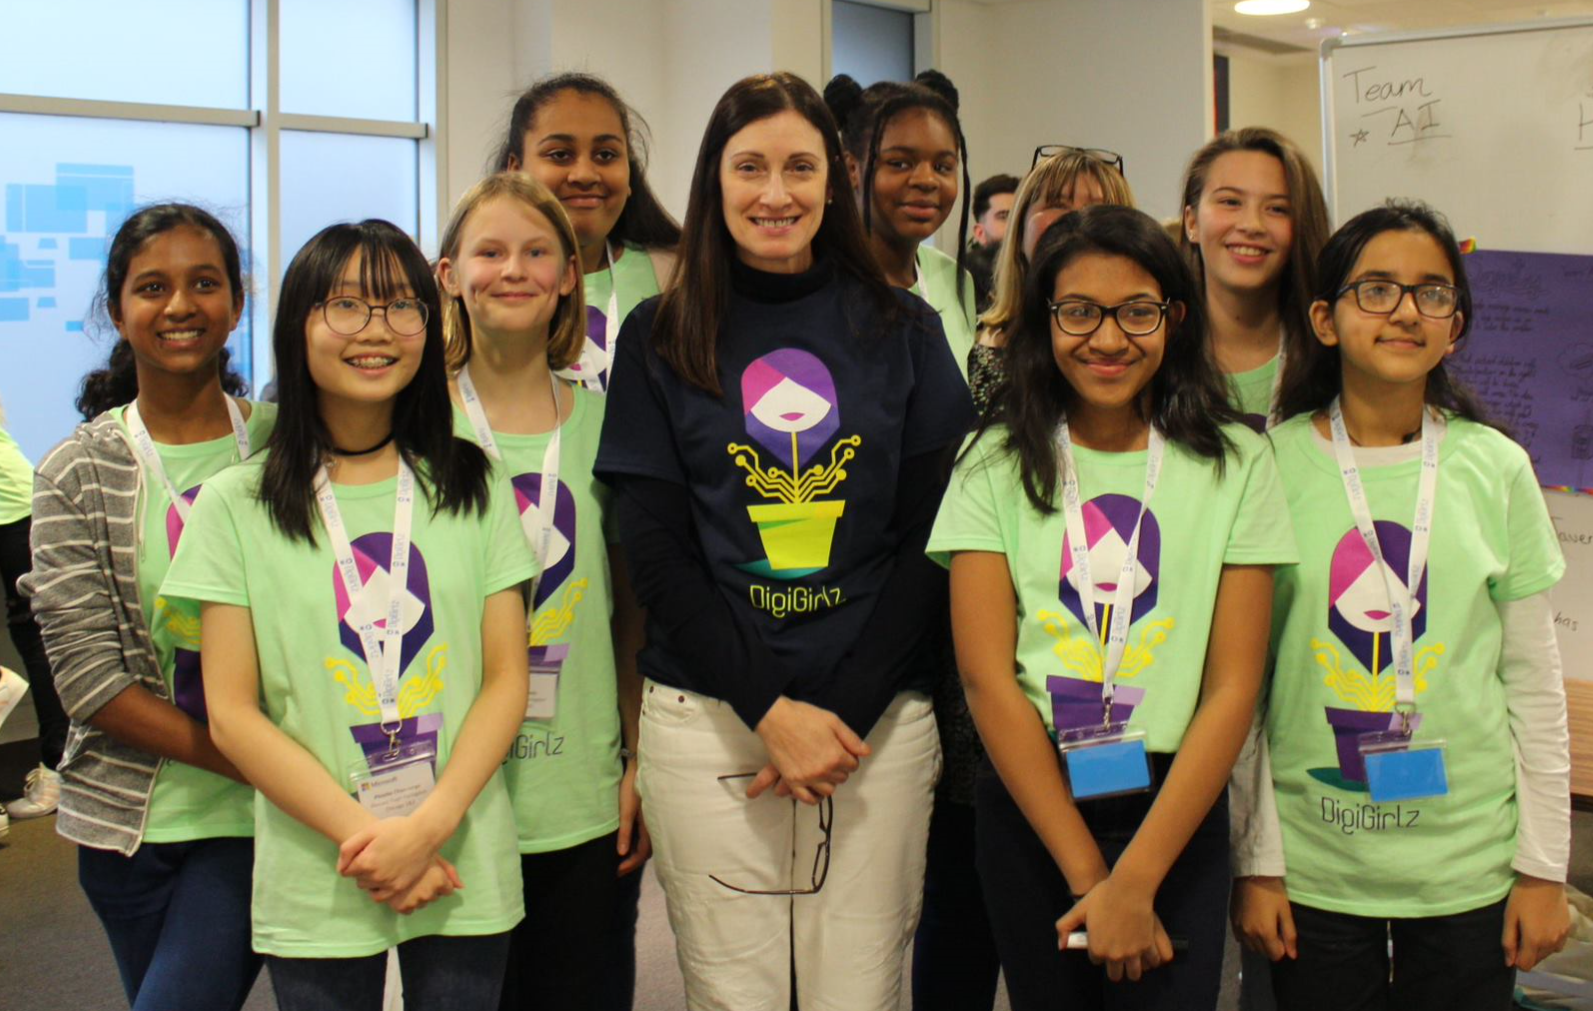 CIndy Rose with some of the DigiGirlz participants